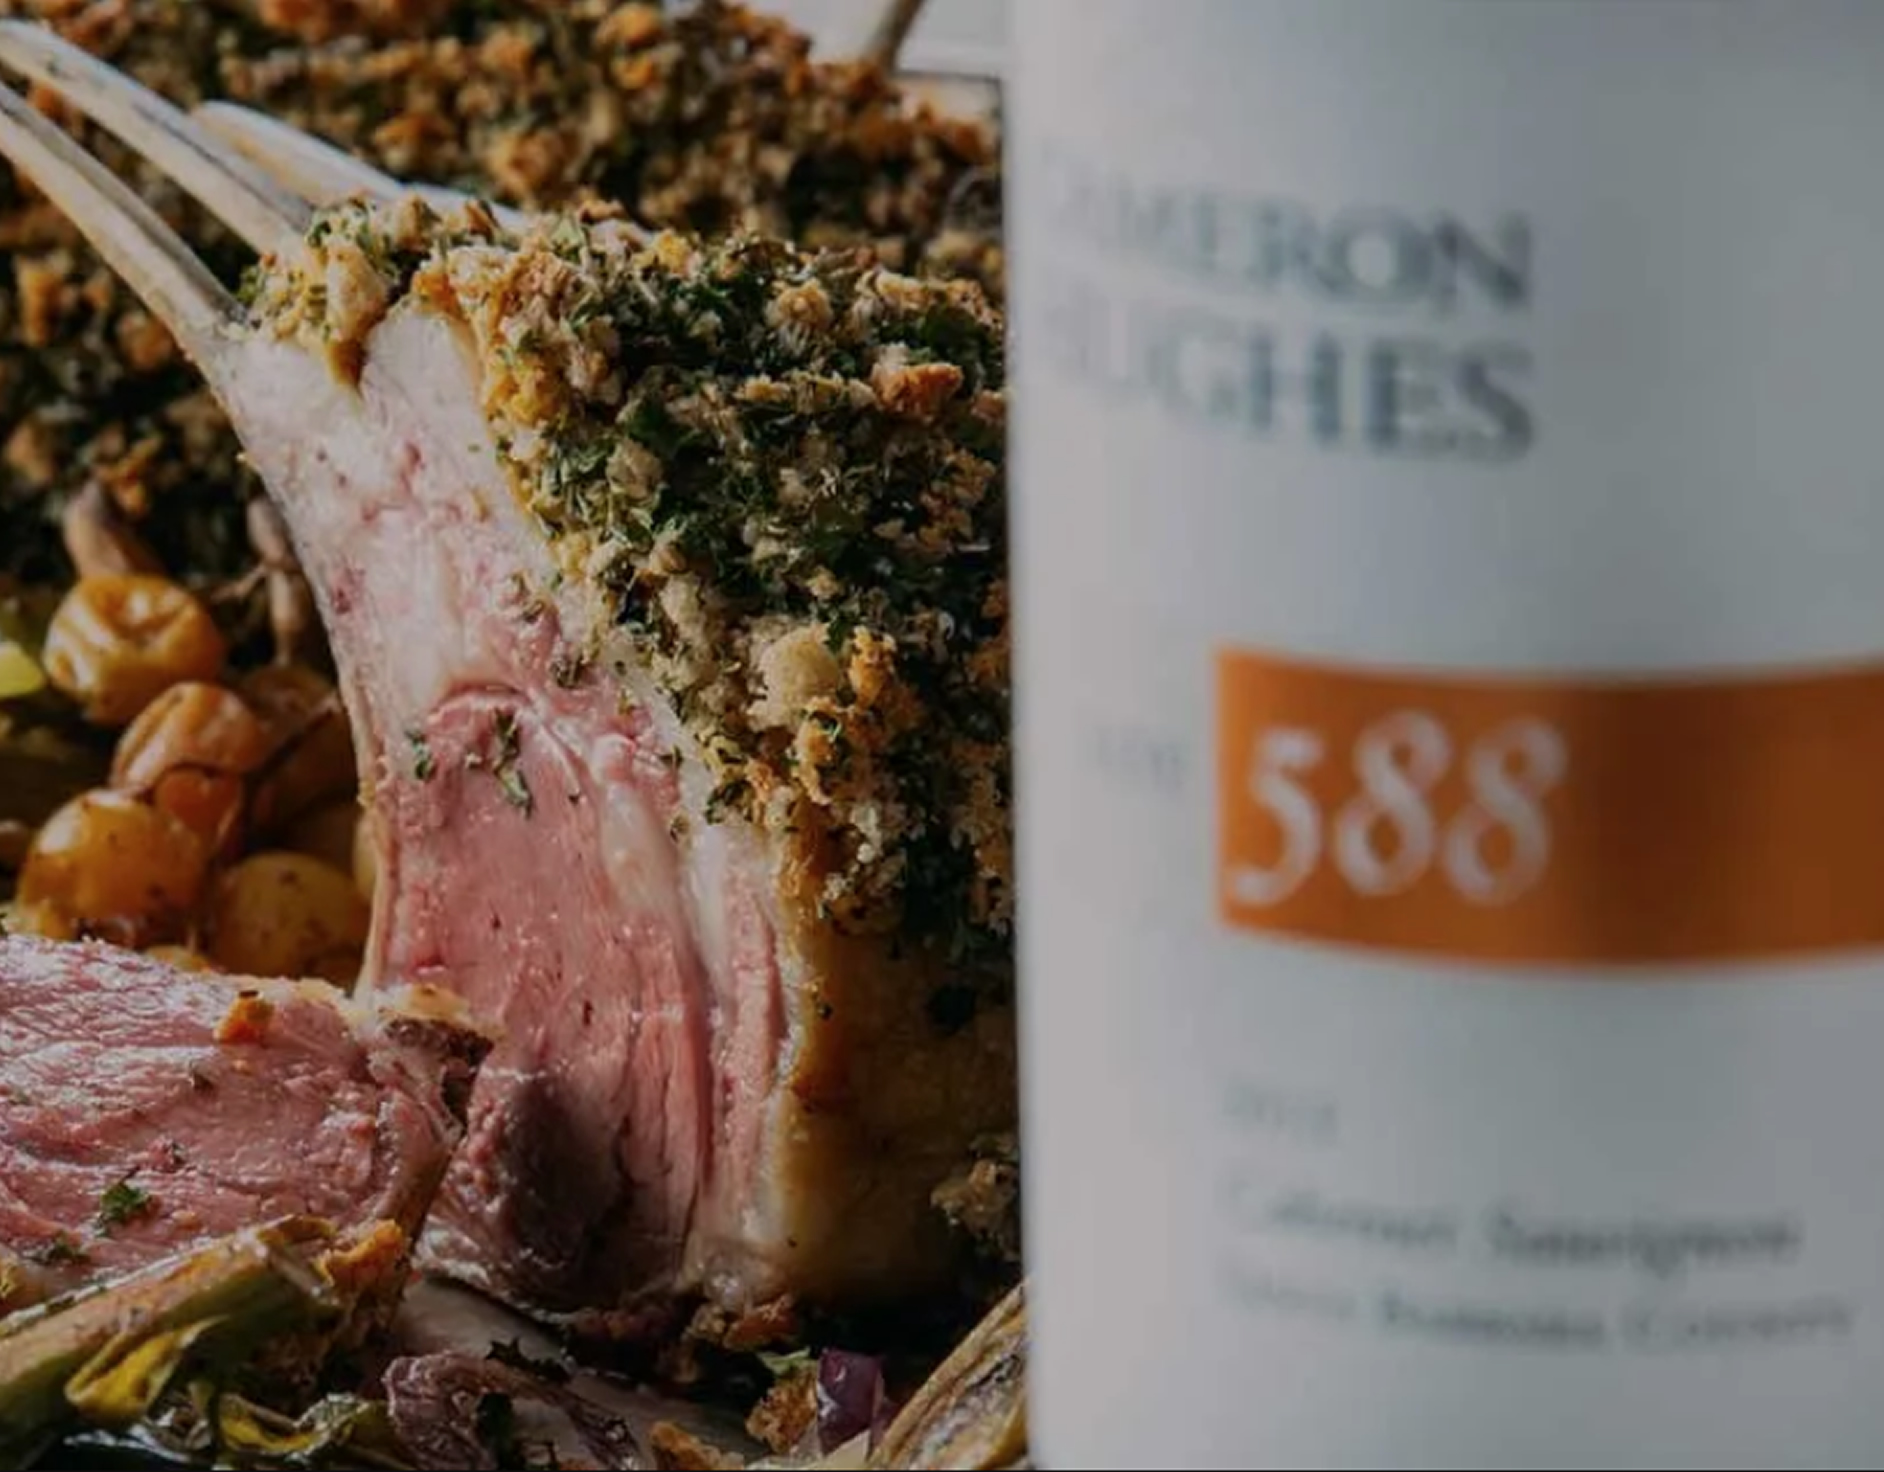 Rack of Lamb paired with Cameron Hughes Wine Lot 588 illustrates great wine pairing